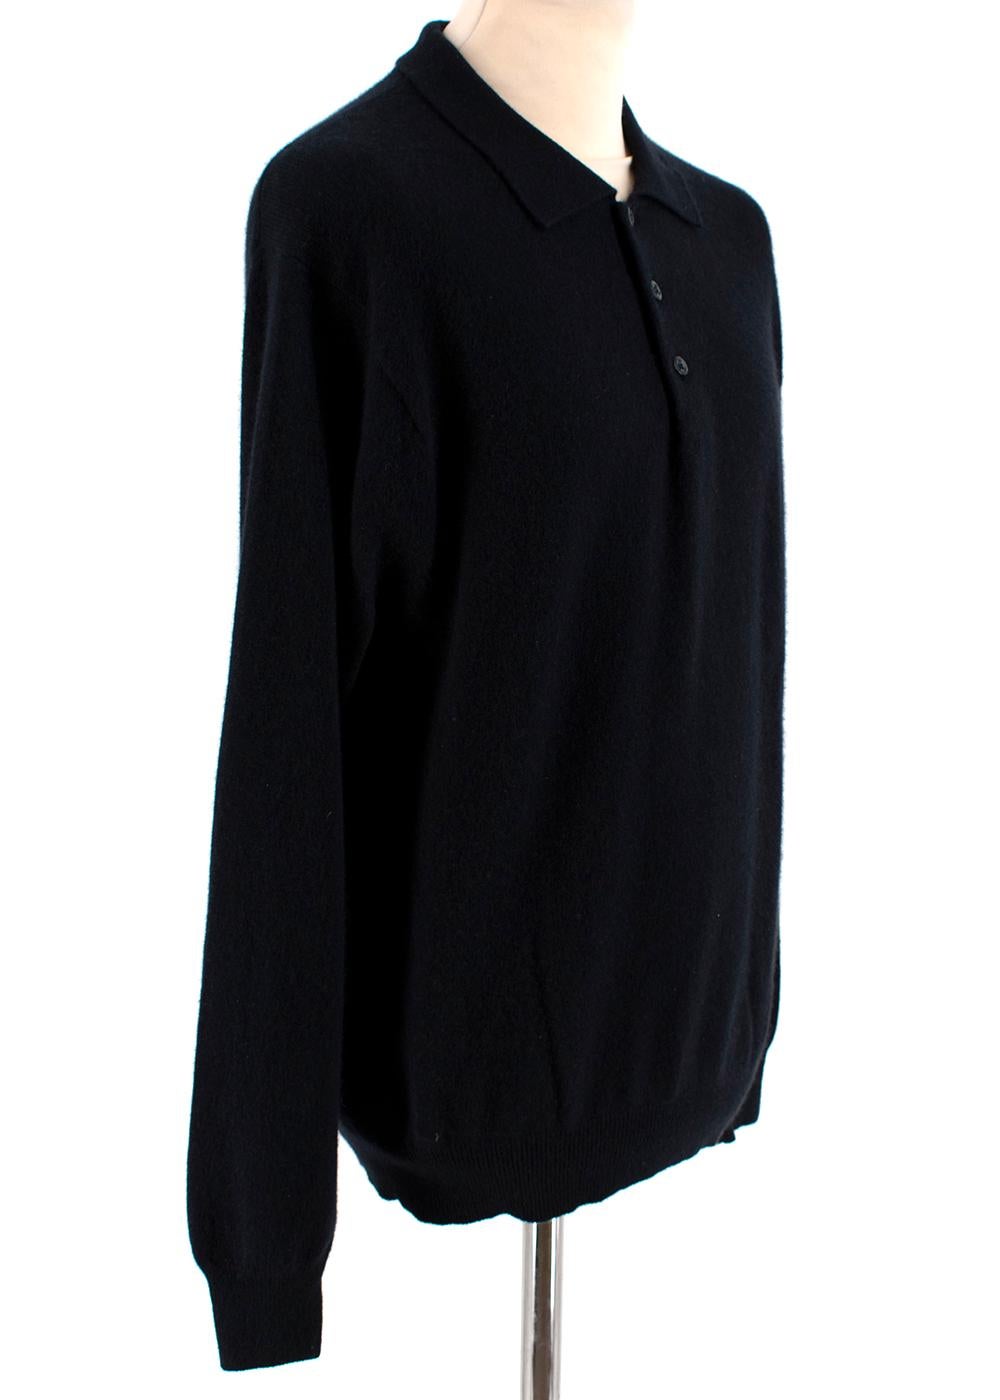 Balmain Black Cashmere Polo Jumper

- Three button top
- Relaxed collar
- Lightweight
- Classic fit
- Ribbed knit cuffs, hem, collar
- Super soft material

Materials:
100% Cashmere

Made in China
Hand wash, dry clean

Measurements:
Approx.